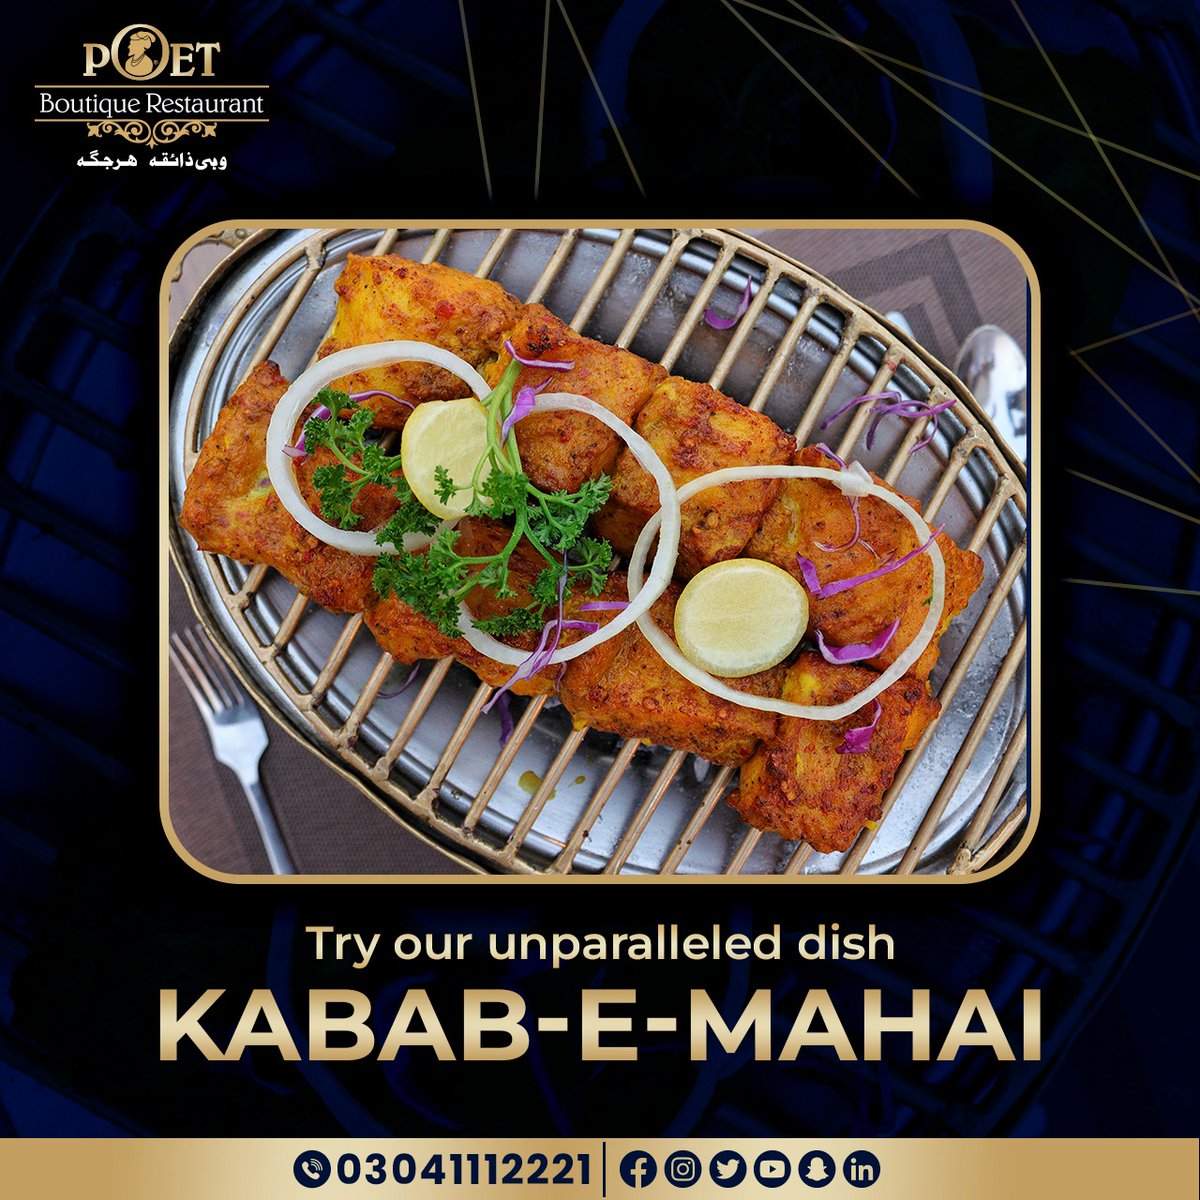 Are you a big fan of Charcoal Grilled Fish? If yes, then how about trying our unparalleled dish, Kabab-e-Mahai ?

 ☎️ 𝟬𝟯𝟬𝟰 𝟭𝟭𝟭𝟮𝟮𝟮𝟭

#PoetRestaurant #PoetRestaurantLakeCity #KababEMahai #BirthdayBash #Restaurant #RestaurantnNearMe #Foodie #Lahore #Traditional